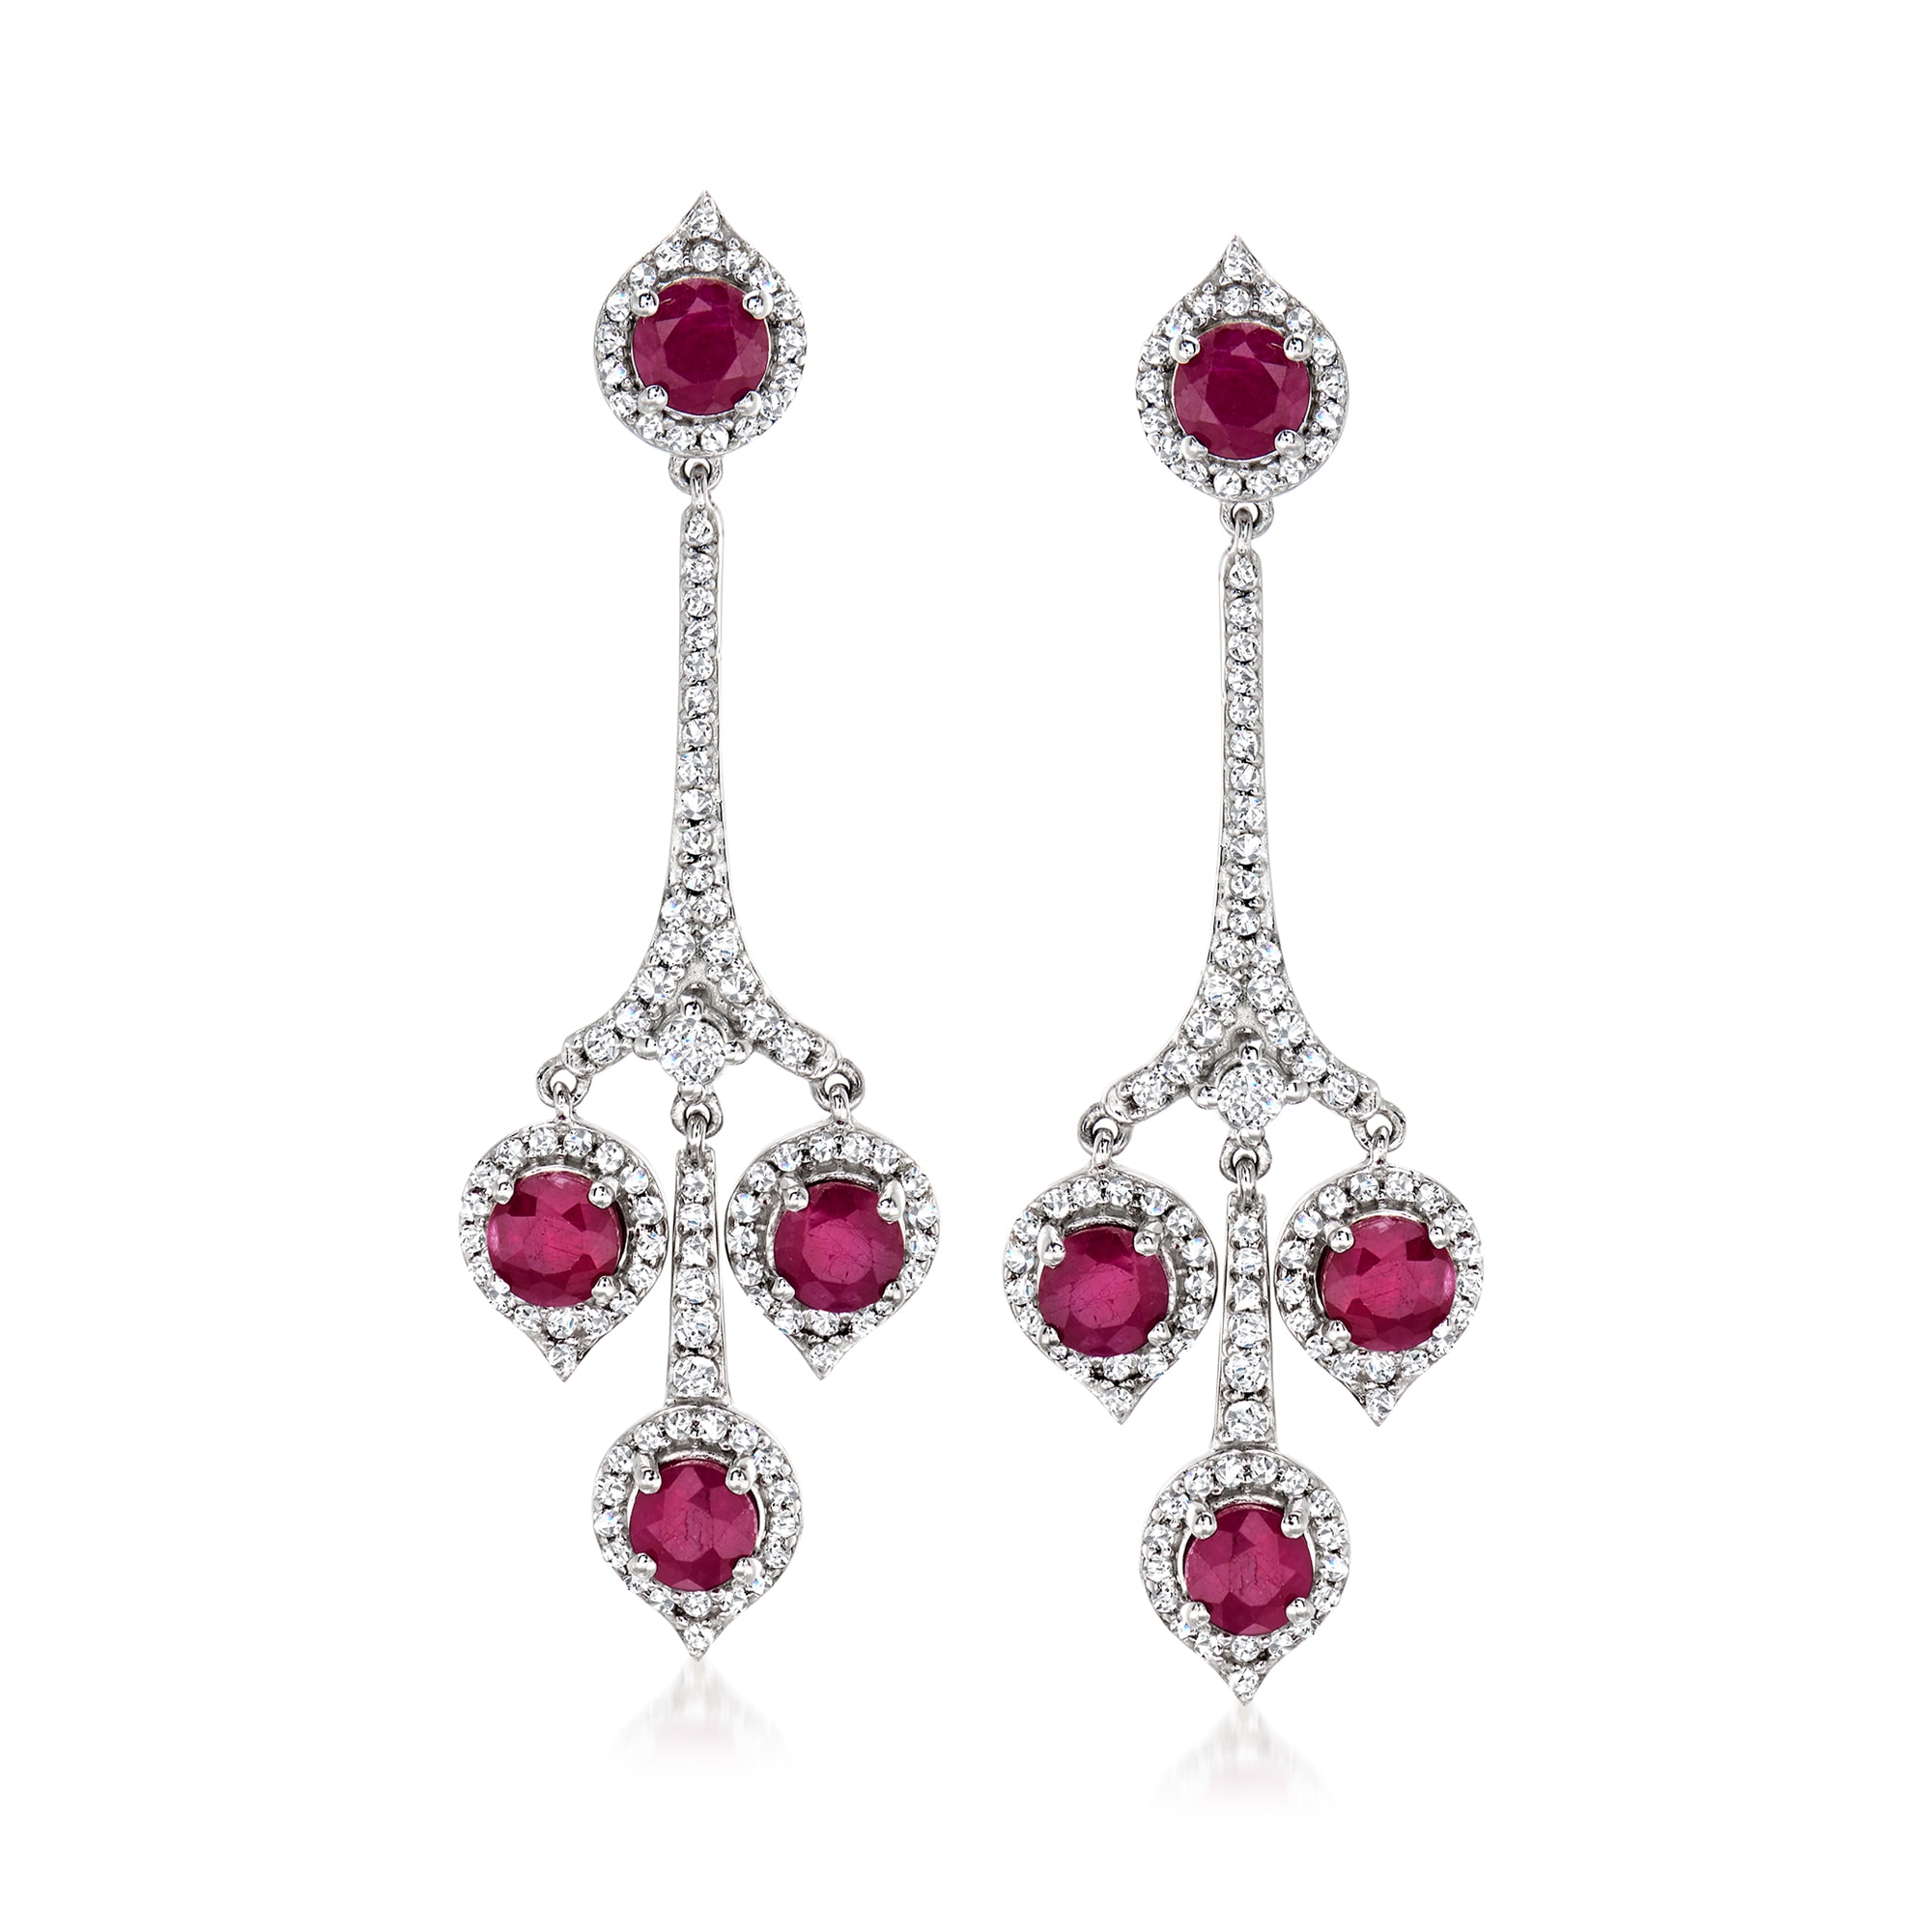 4.30 ct. t.w. Ruby and 1.20 ct. t.w. White Topaz Drop Earrings in ...